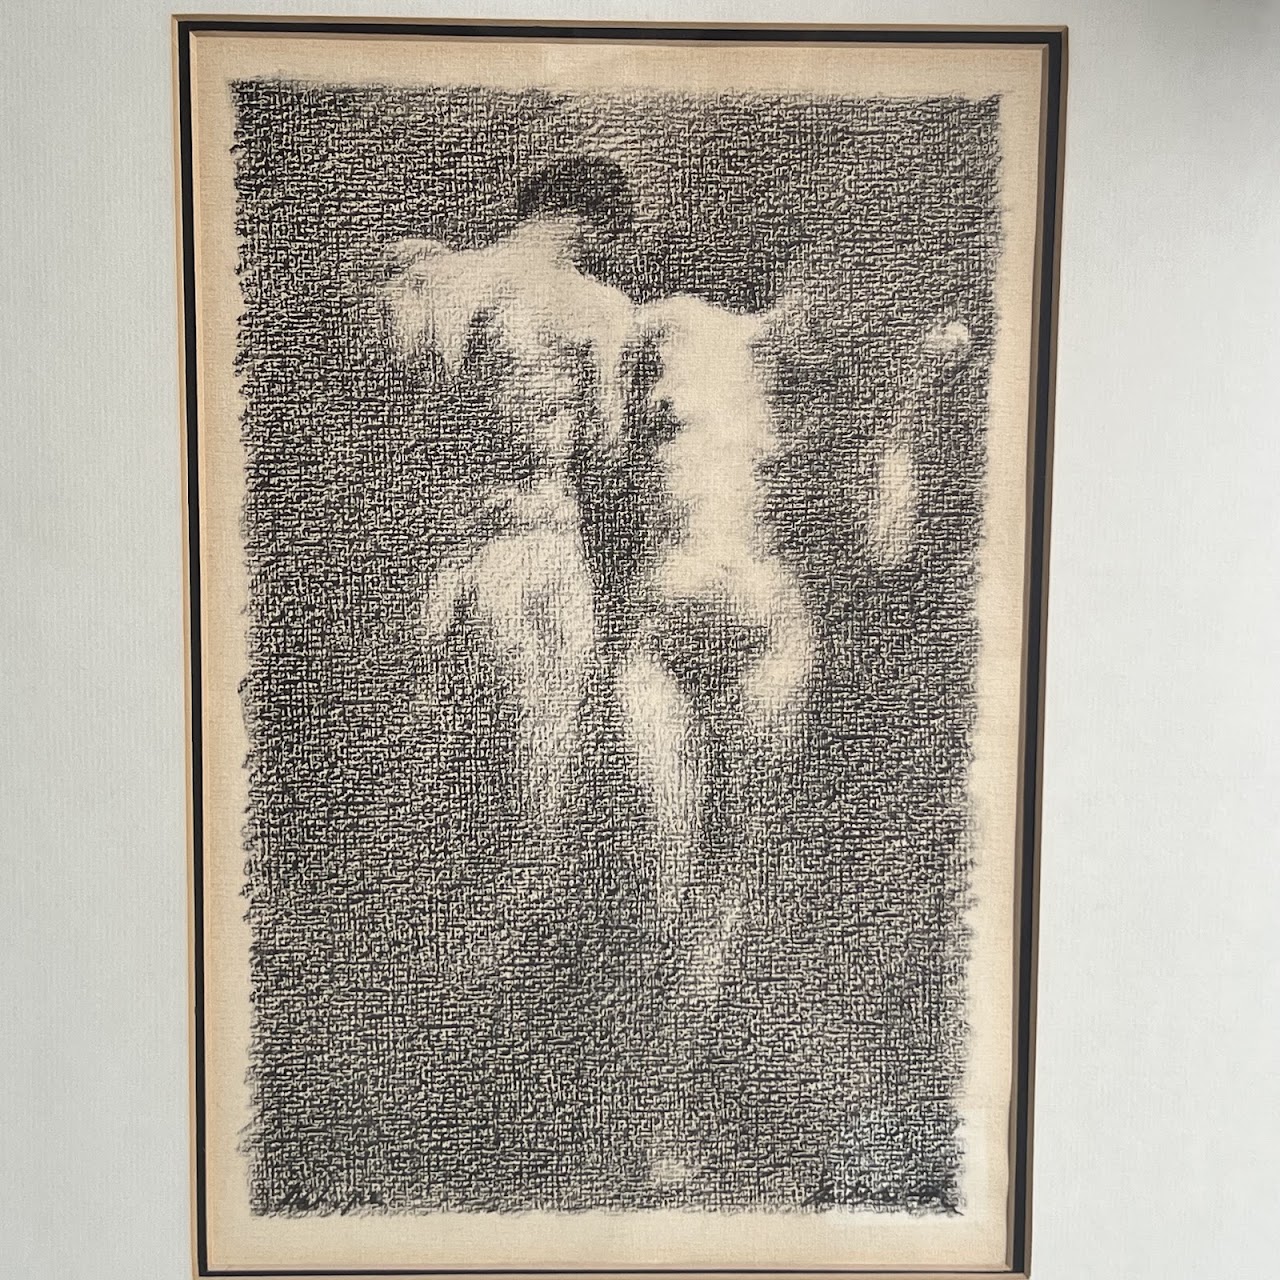 Artur Bar-On Signed Figural Lithograph